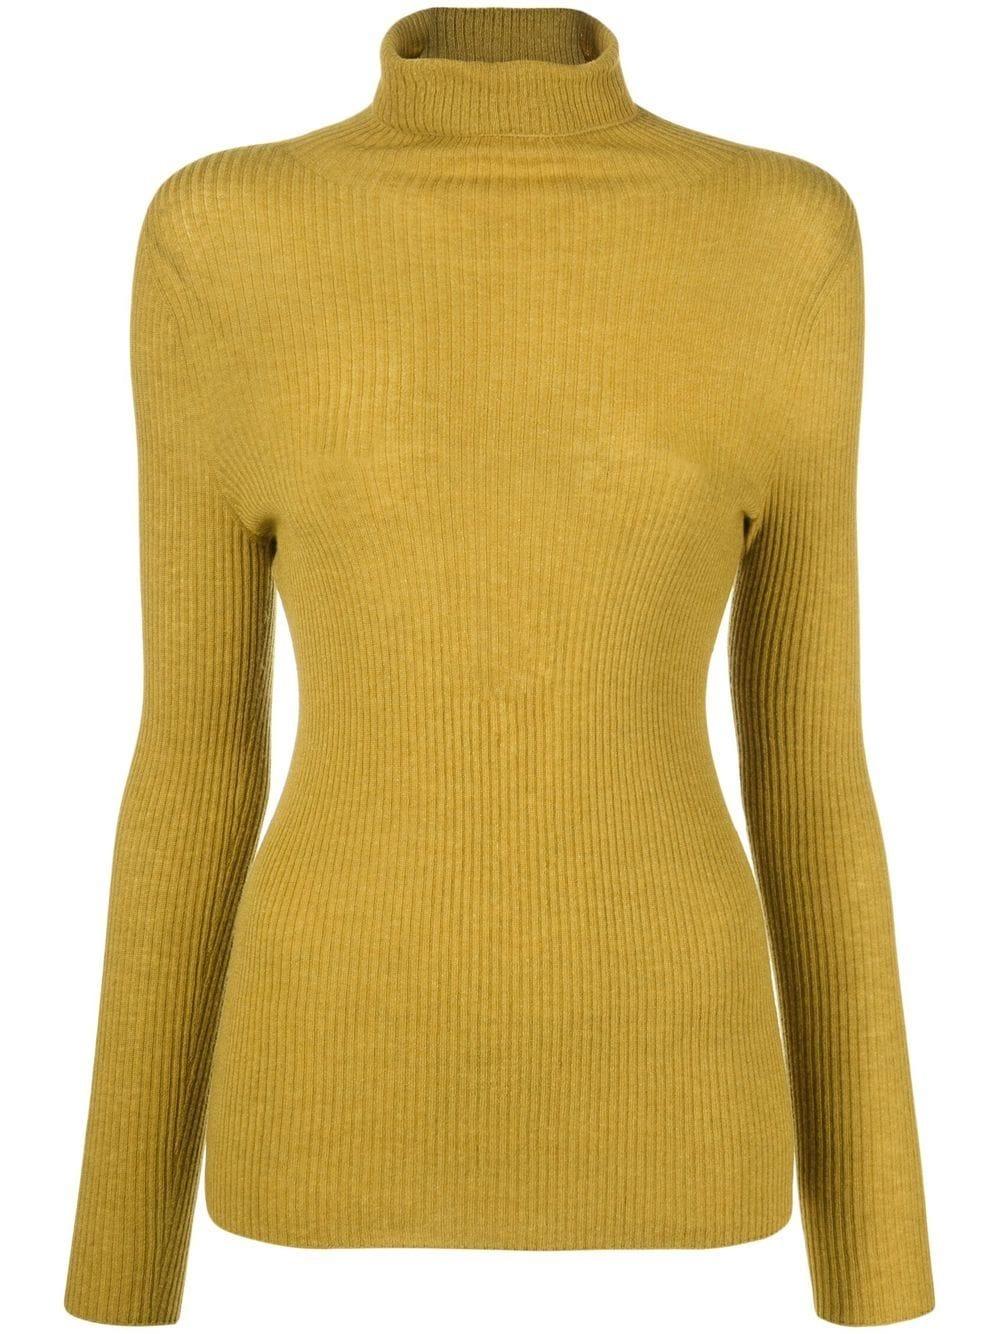 Fabiana Filippi Roll-neck Fitted Jumper in Yellow | Lyst